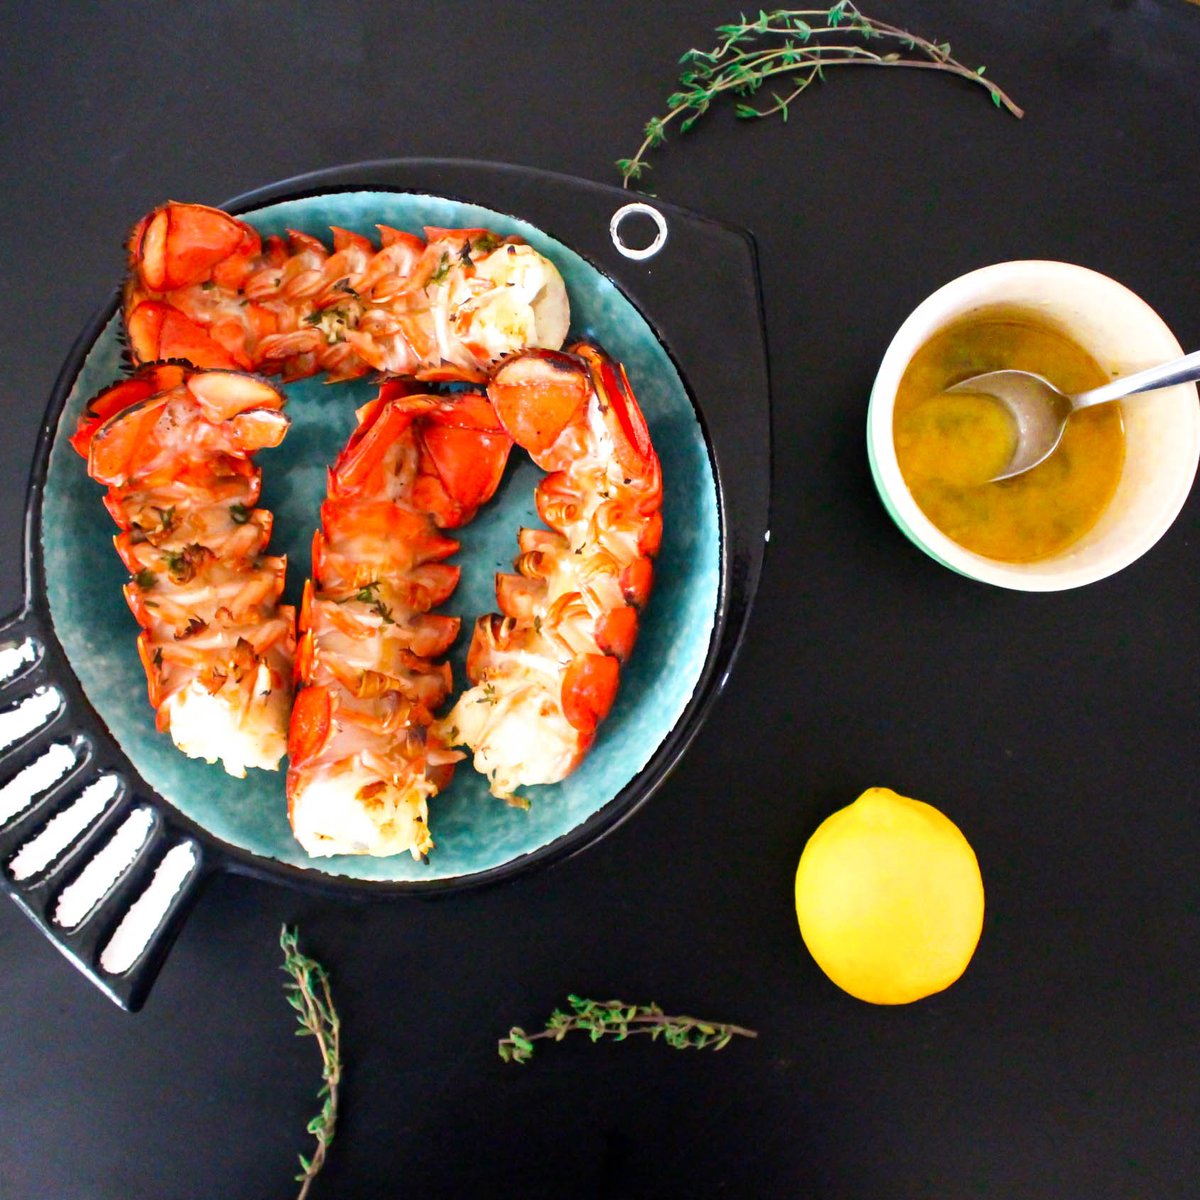 These paleo and gluten free Grilled Lobster Tails drizzled in lemon butter are so easy to make, but tastes and looks like you spent hours in the kitchen! #paleo #whole30 #keto #lowcarb #lchf #grillrecipe #glutenfree #Dairyfree #FathersDay 
Recipe link: buff.ly/2MnBCG1